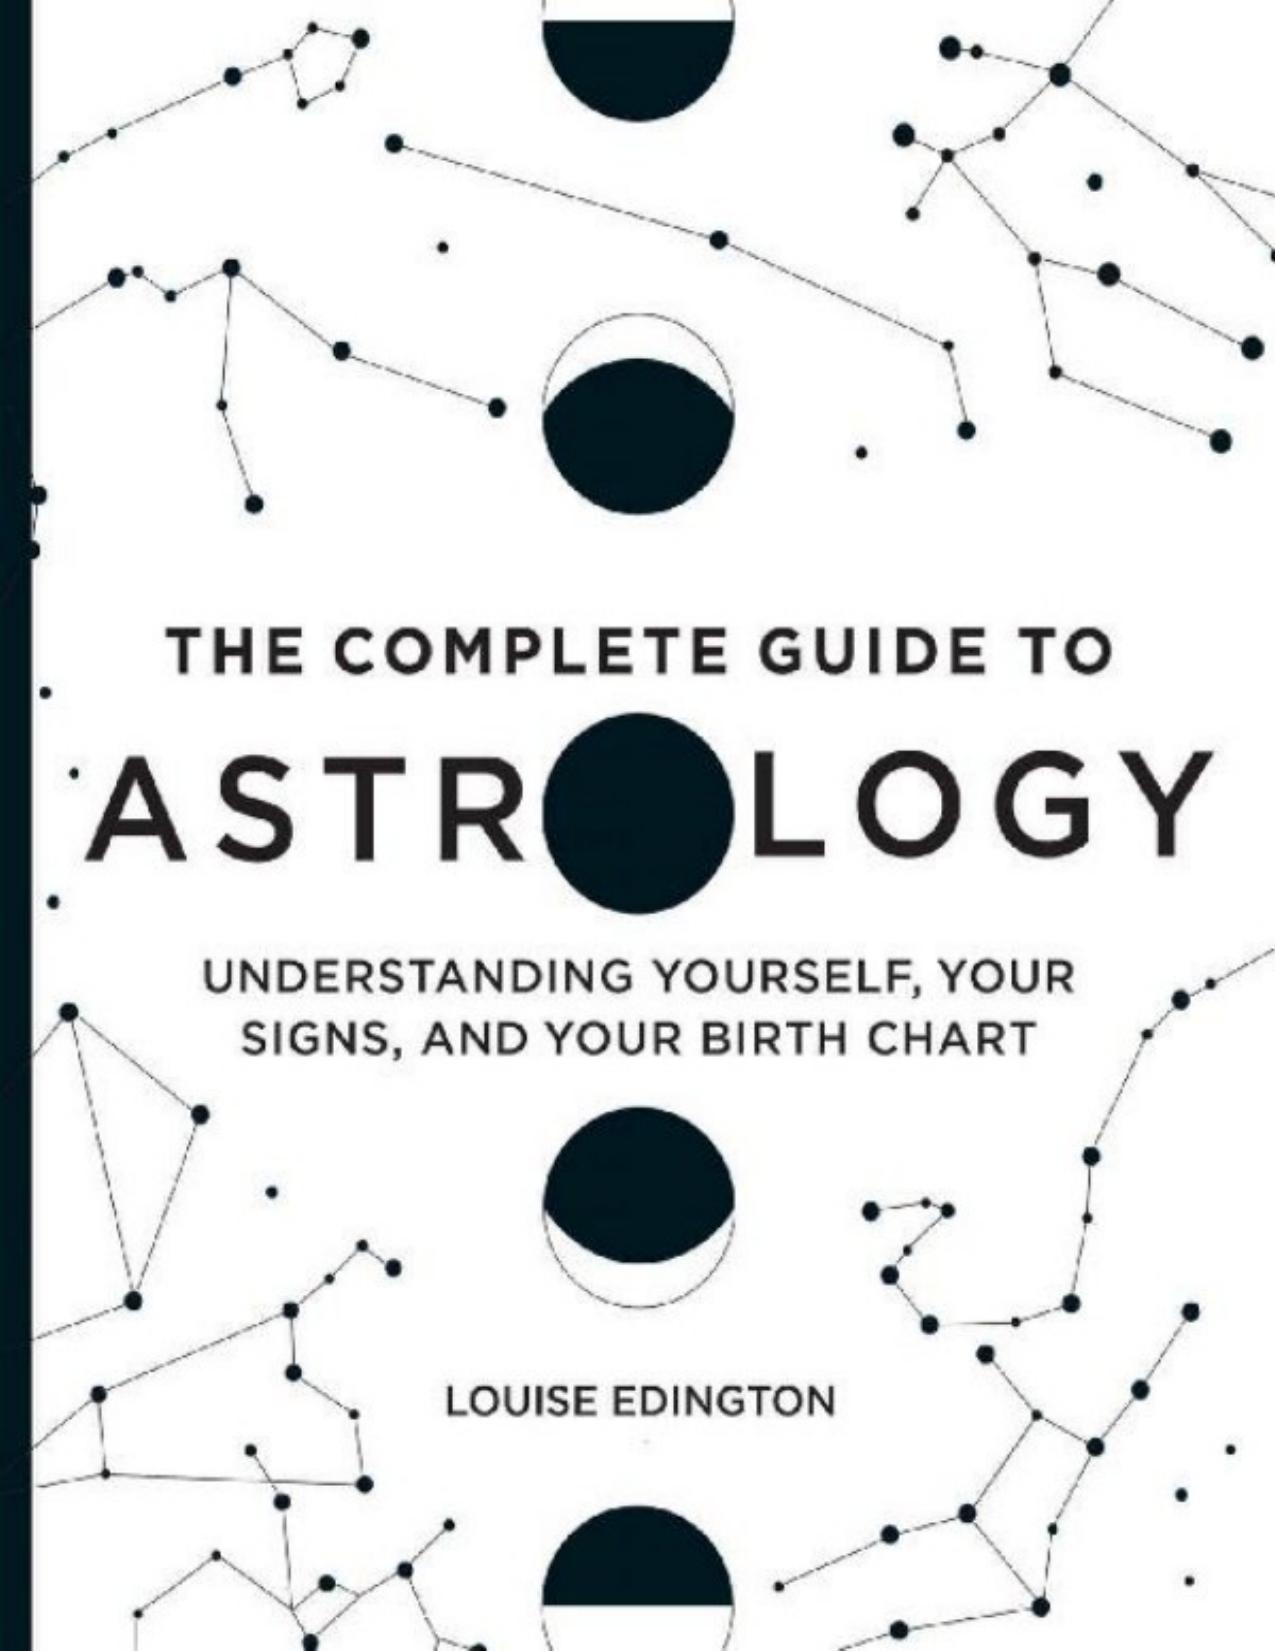 The Complete Guide to Astrology: Understanding Yourself, Your Signs, and Your Birth Chart by Louise Edington